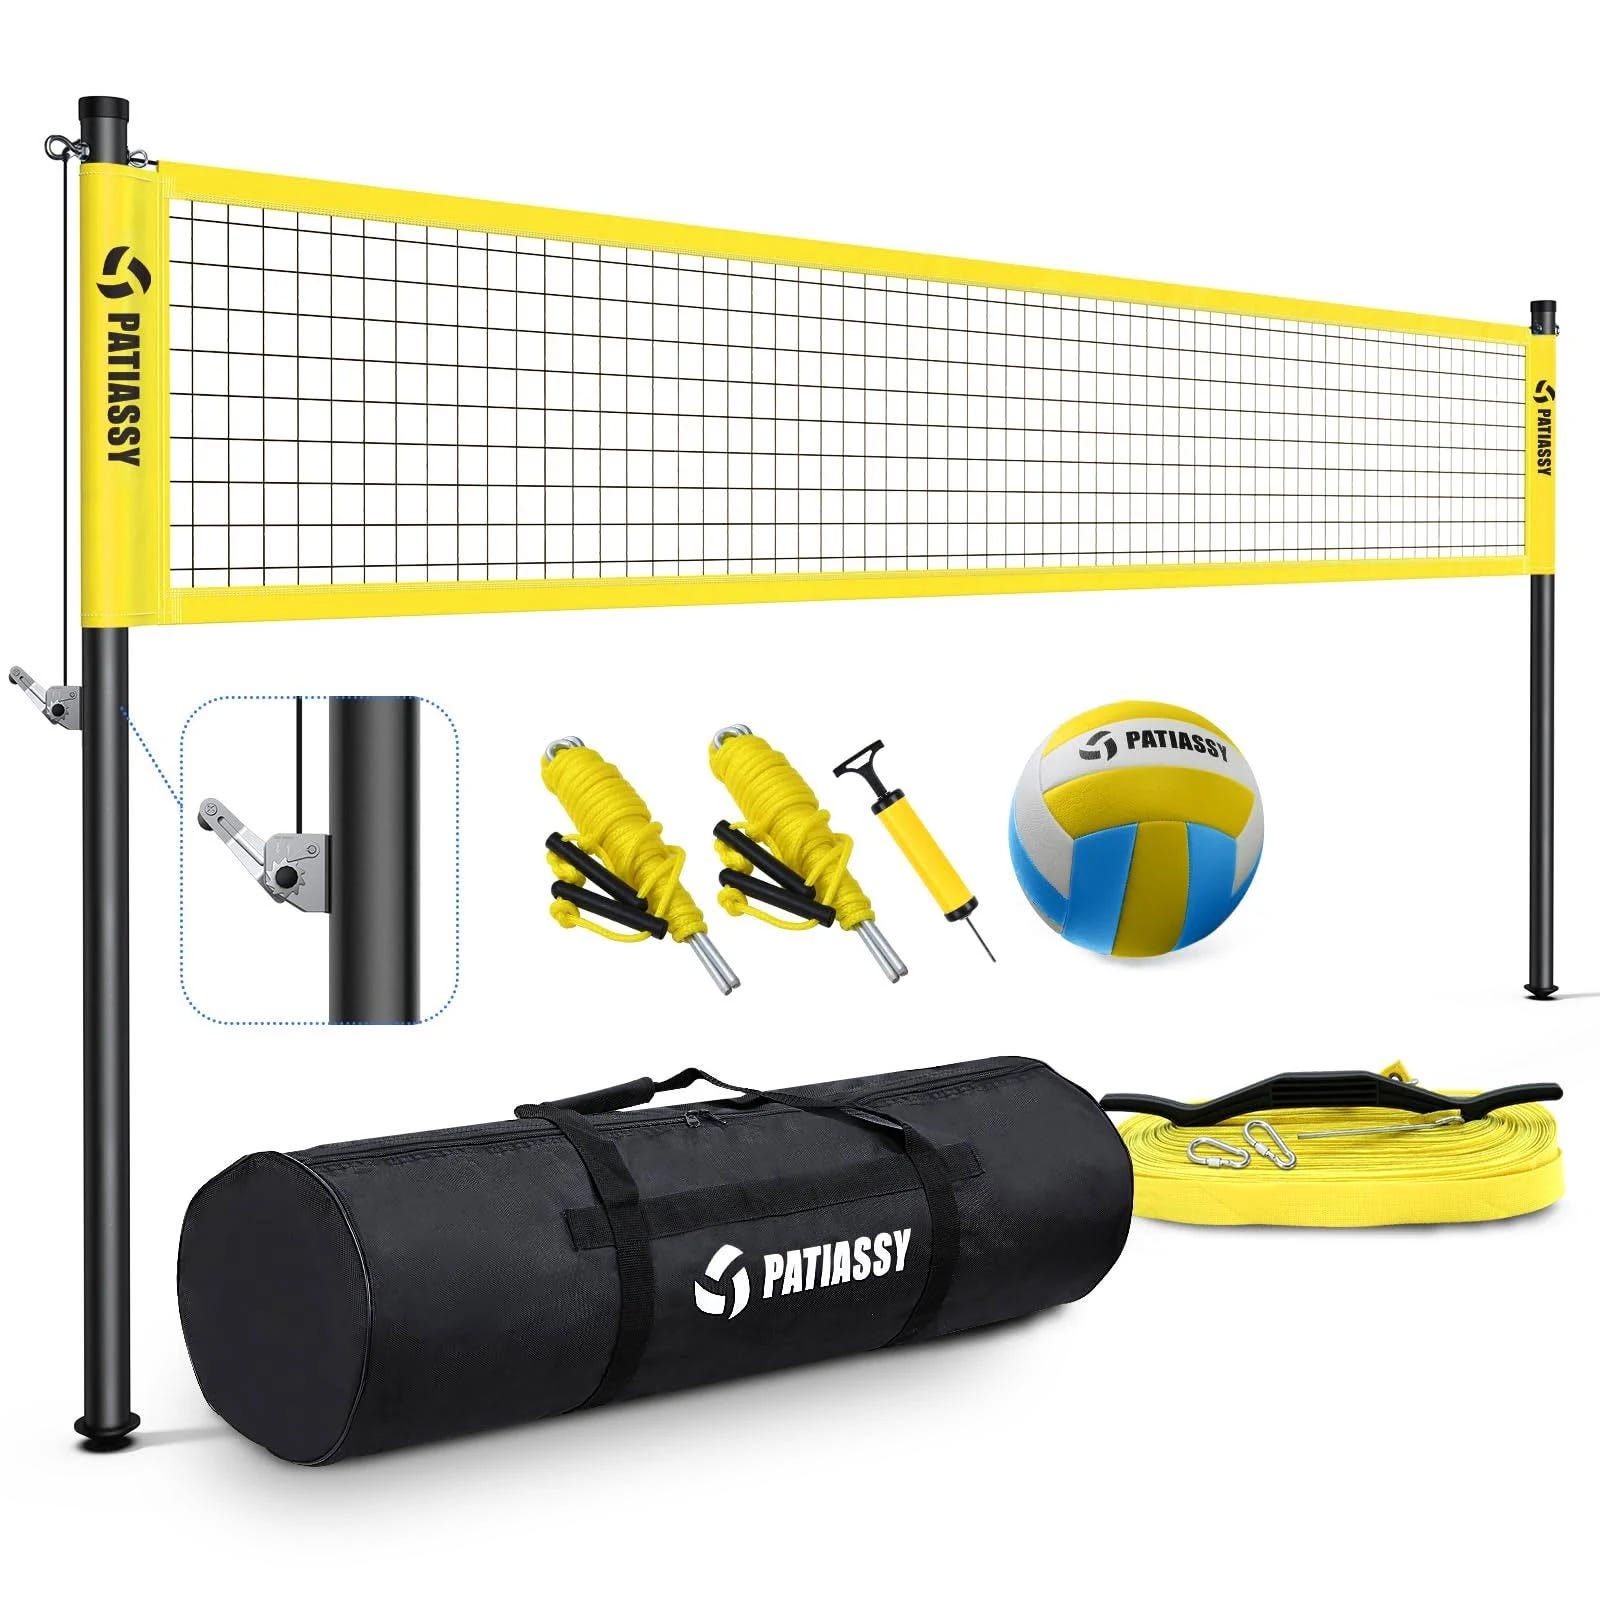 Patiassy Portable Volleyball Net Set with Height-Adjustable Aluminum Poles and Equipment | Image